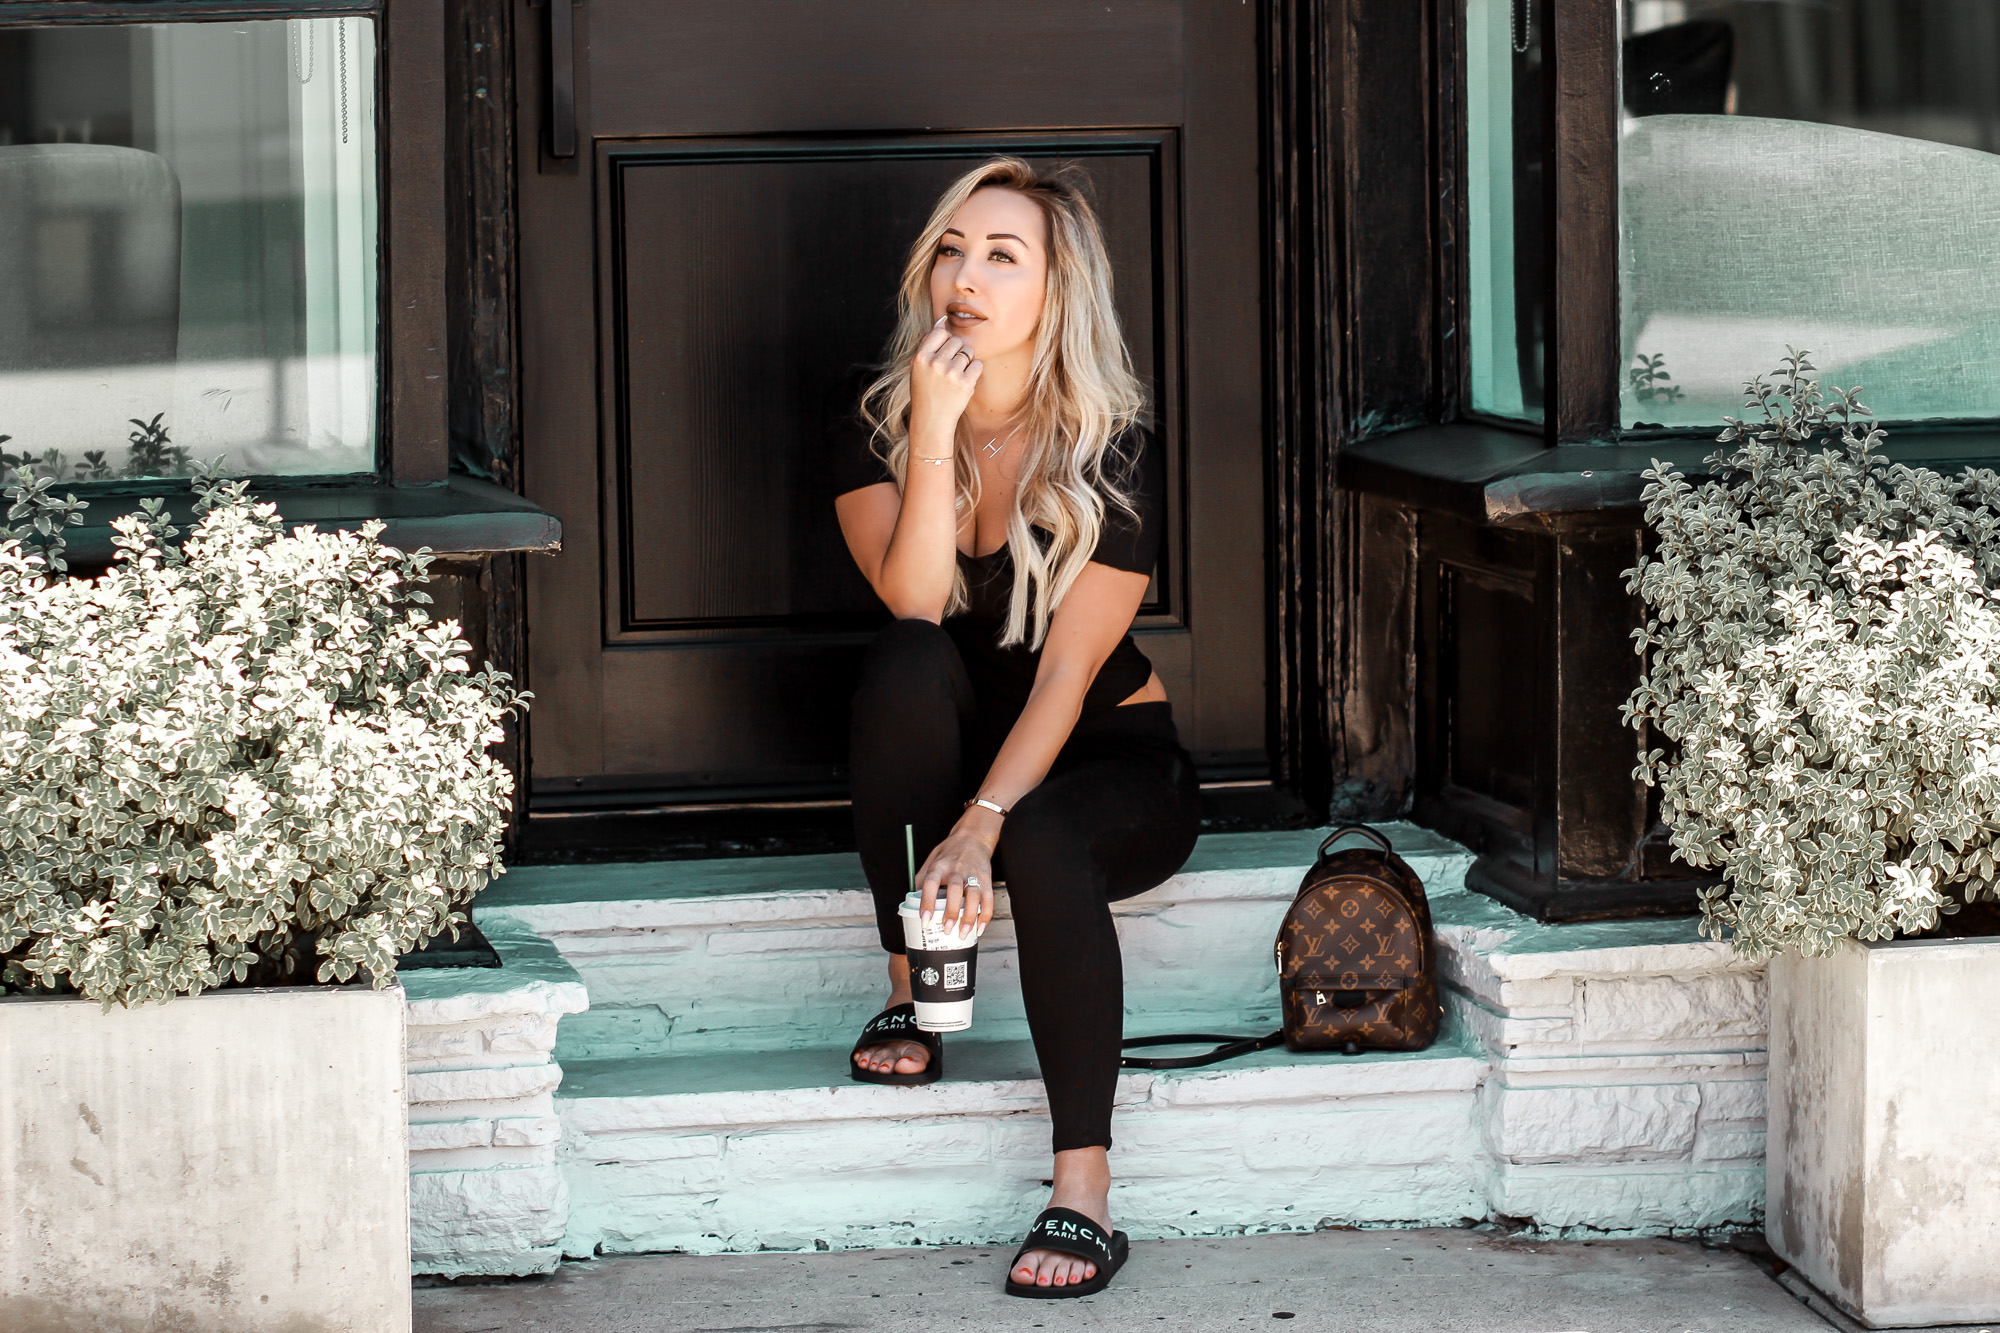 ROKWOLF Active Lifestyle | What I Actually Wear Everyday | Lounge wear | Active wear | Blondie in the City by Hayley Larue